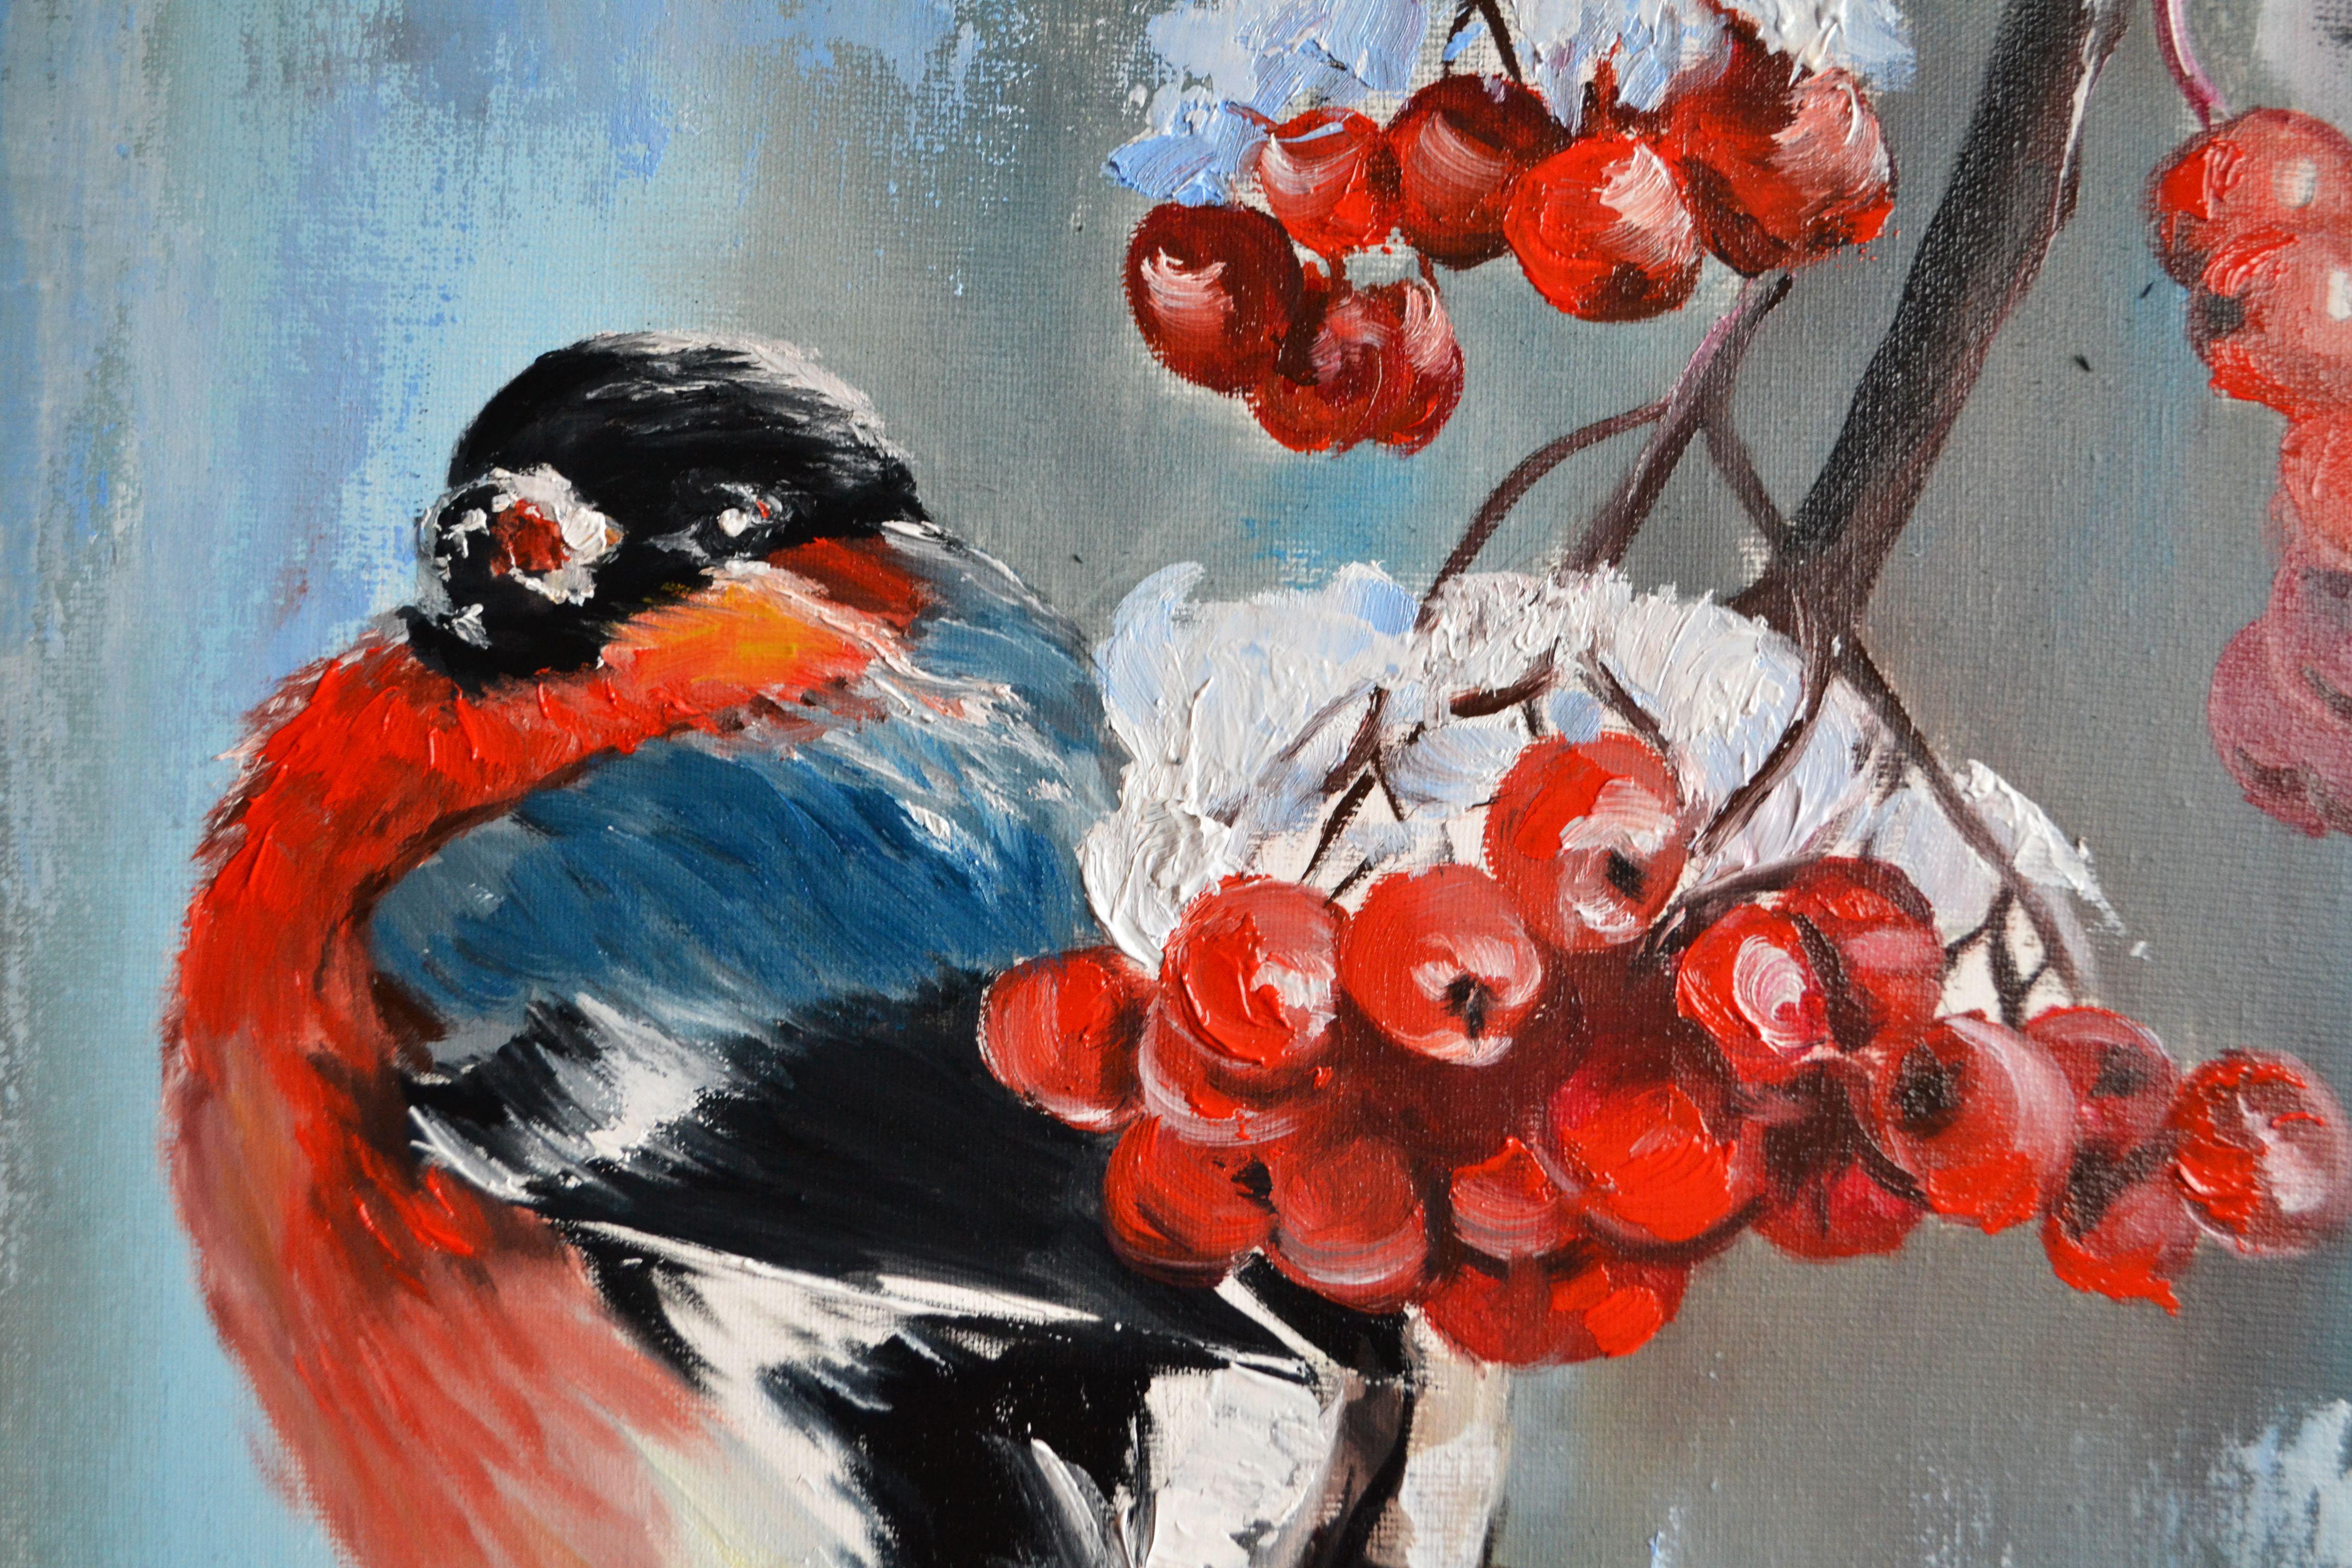 Big red bullfinch on a rowan branch sprinkled with snow. Red, white, blue, purple - the festive colors of winter. The red bird looks like a big red heart. It will be a wonderful bright accent in your home, as well as a wonderful gift and symbol of